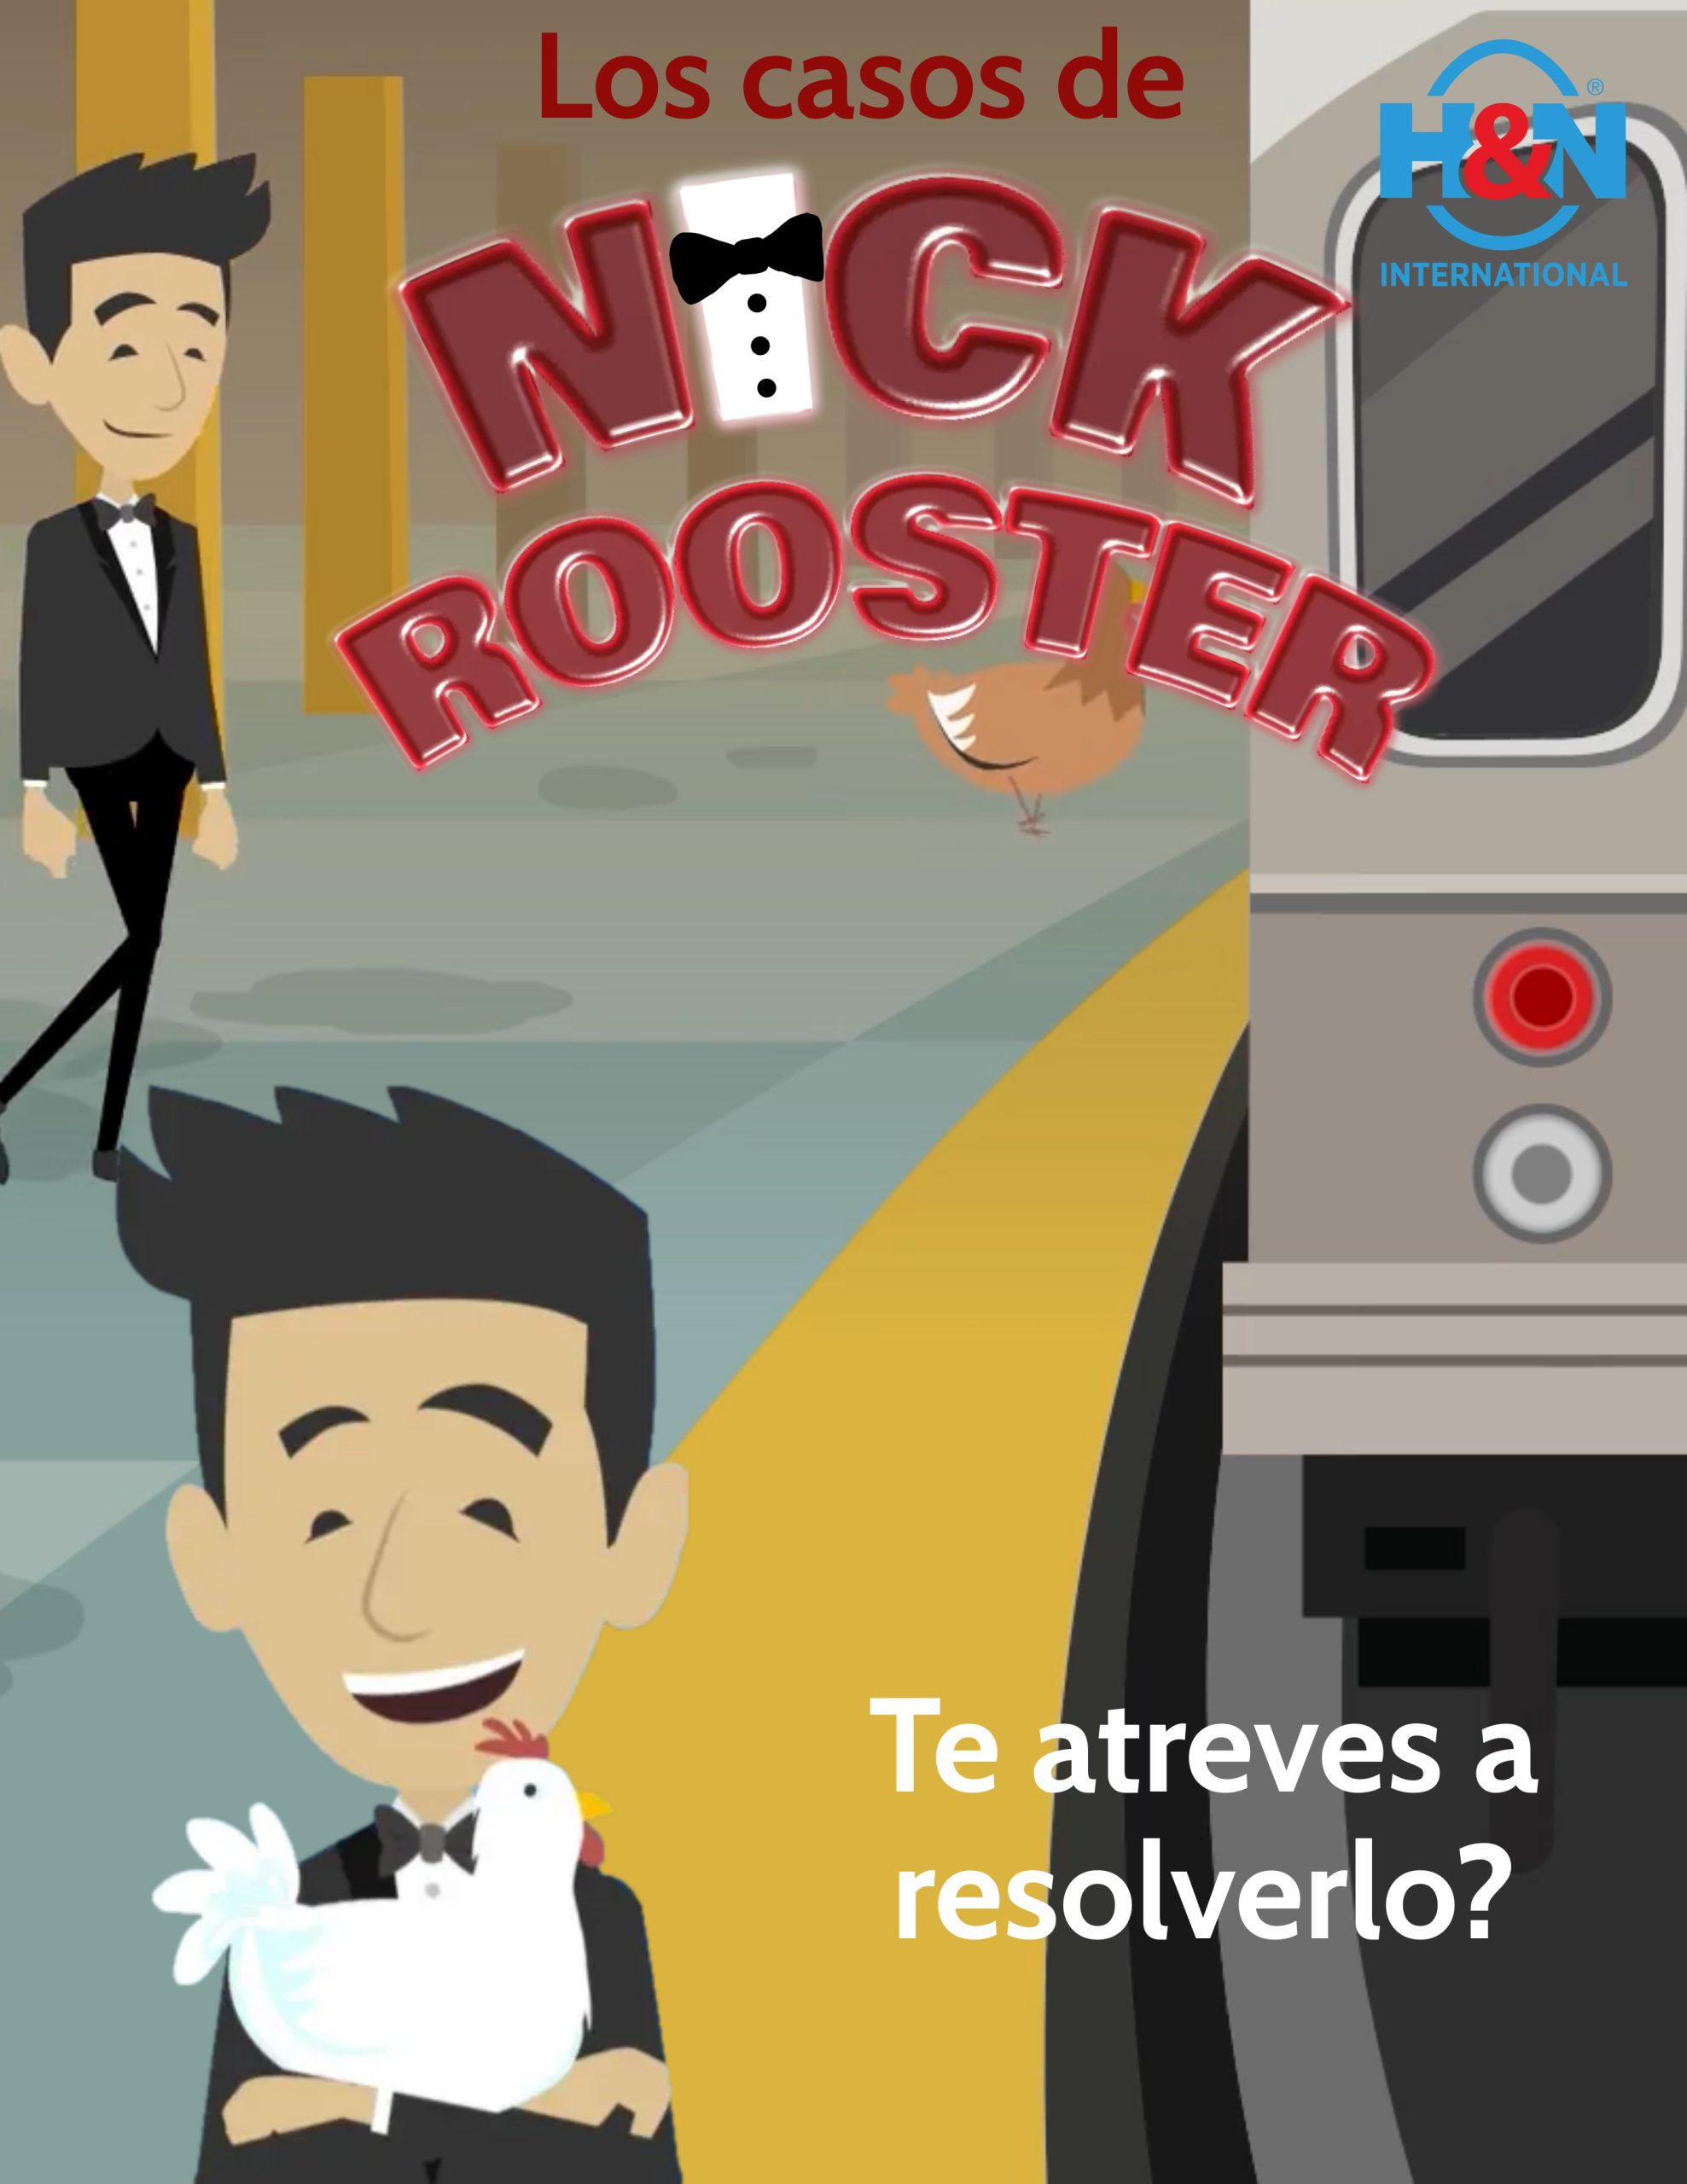 Nick Rooster caso no. 16